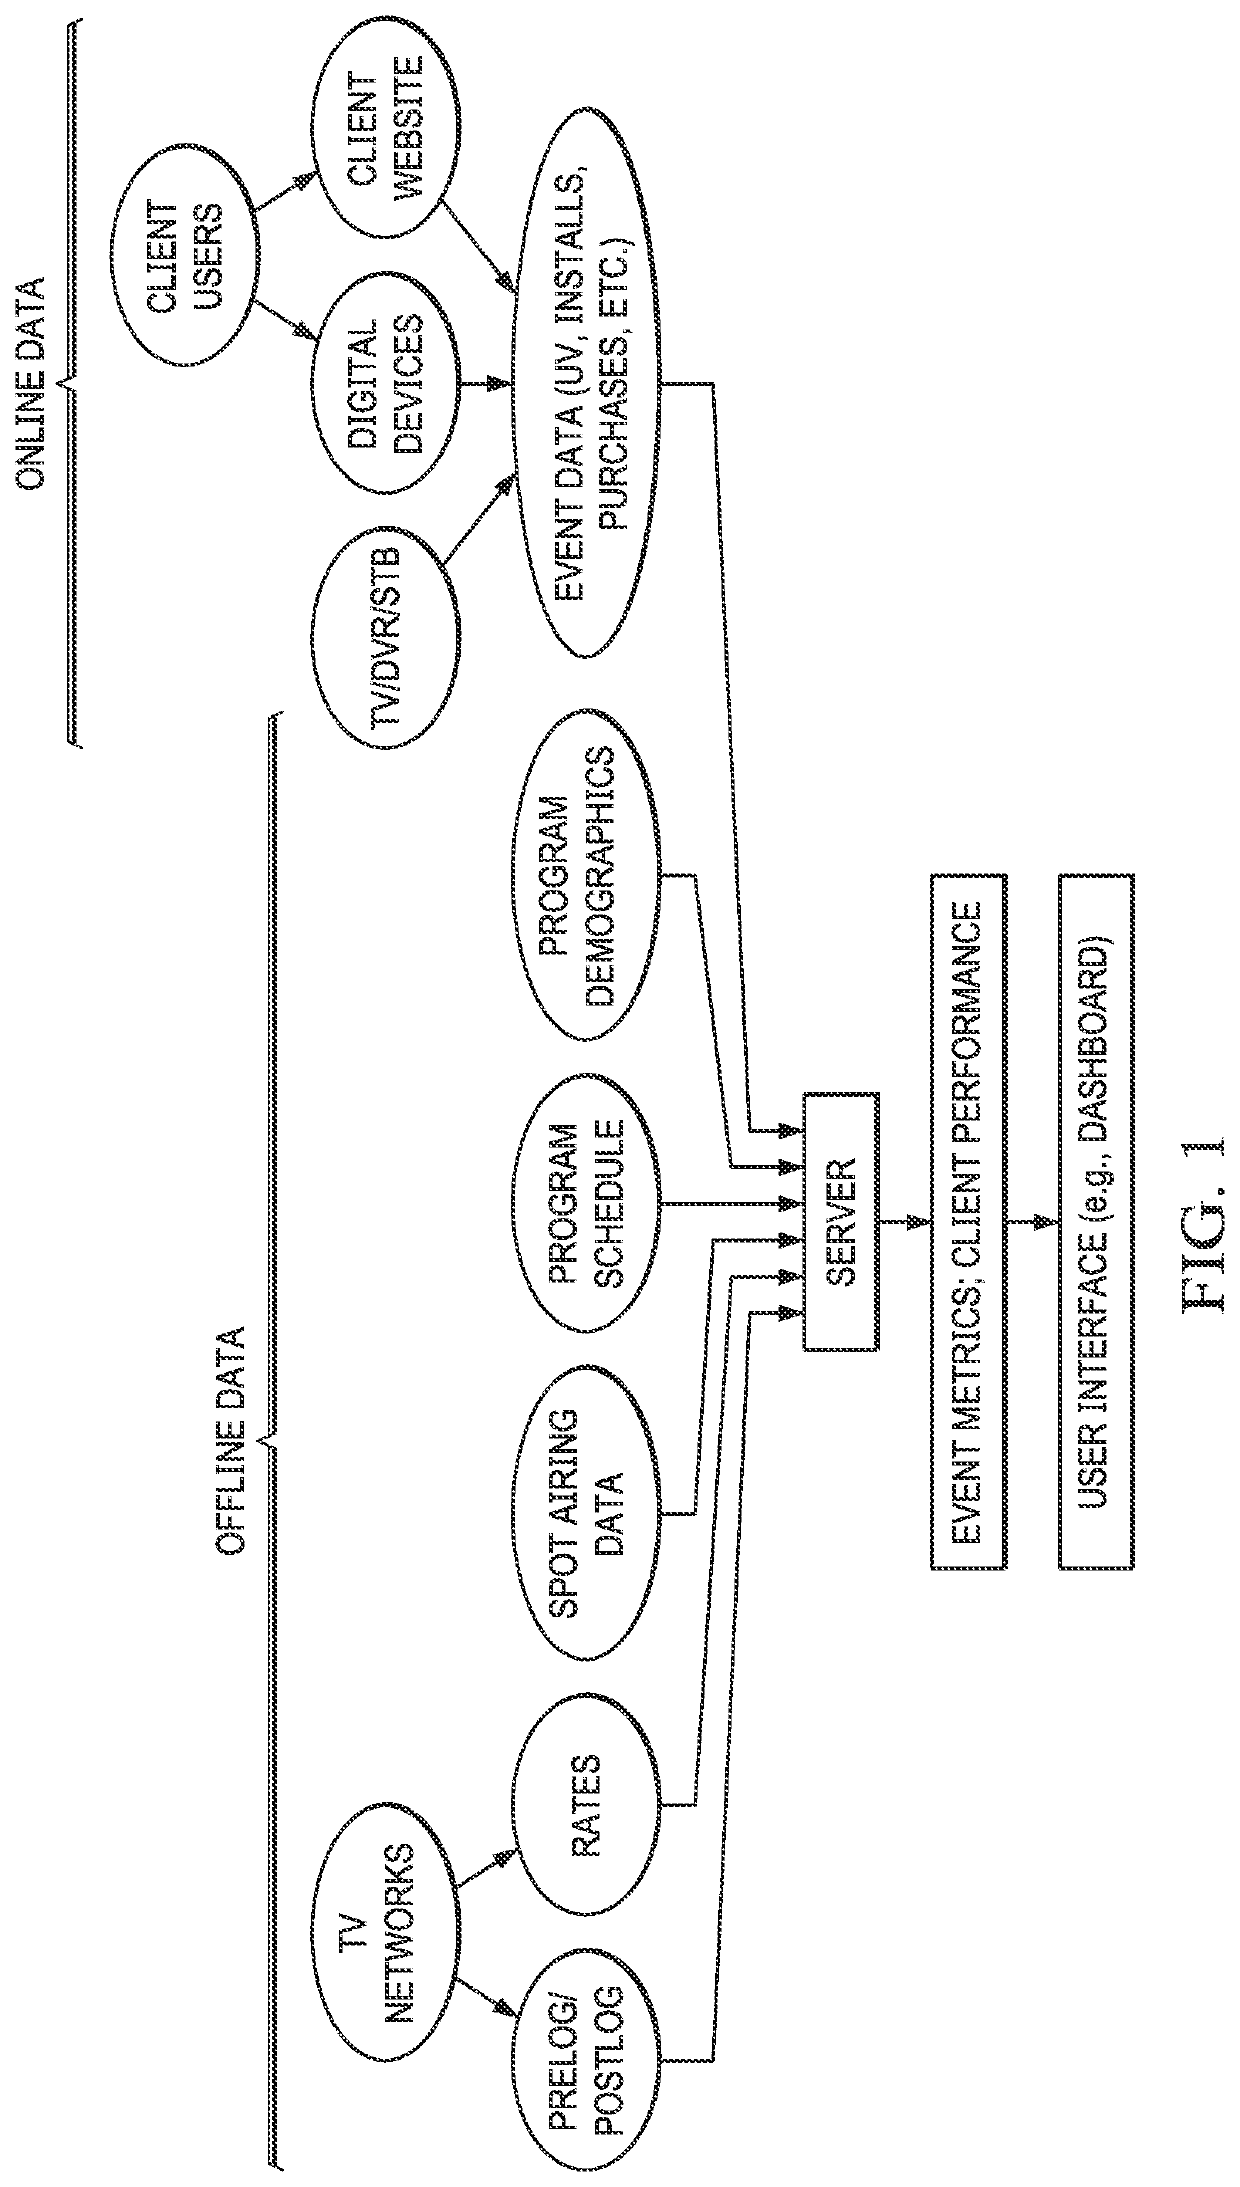 Systems and methods for debiasing media creative efficiency